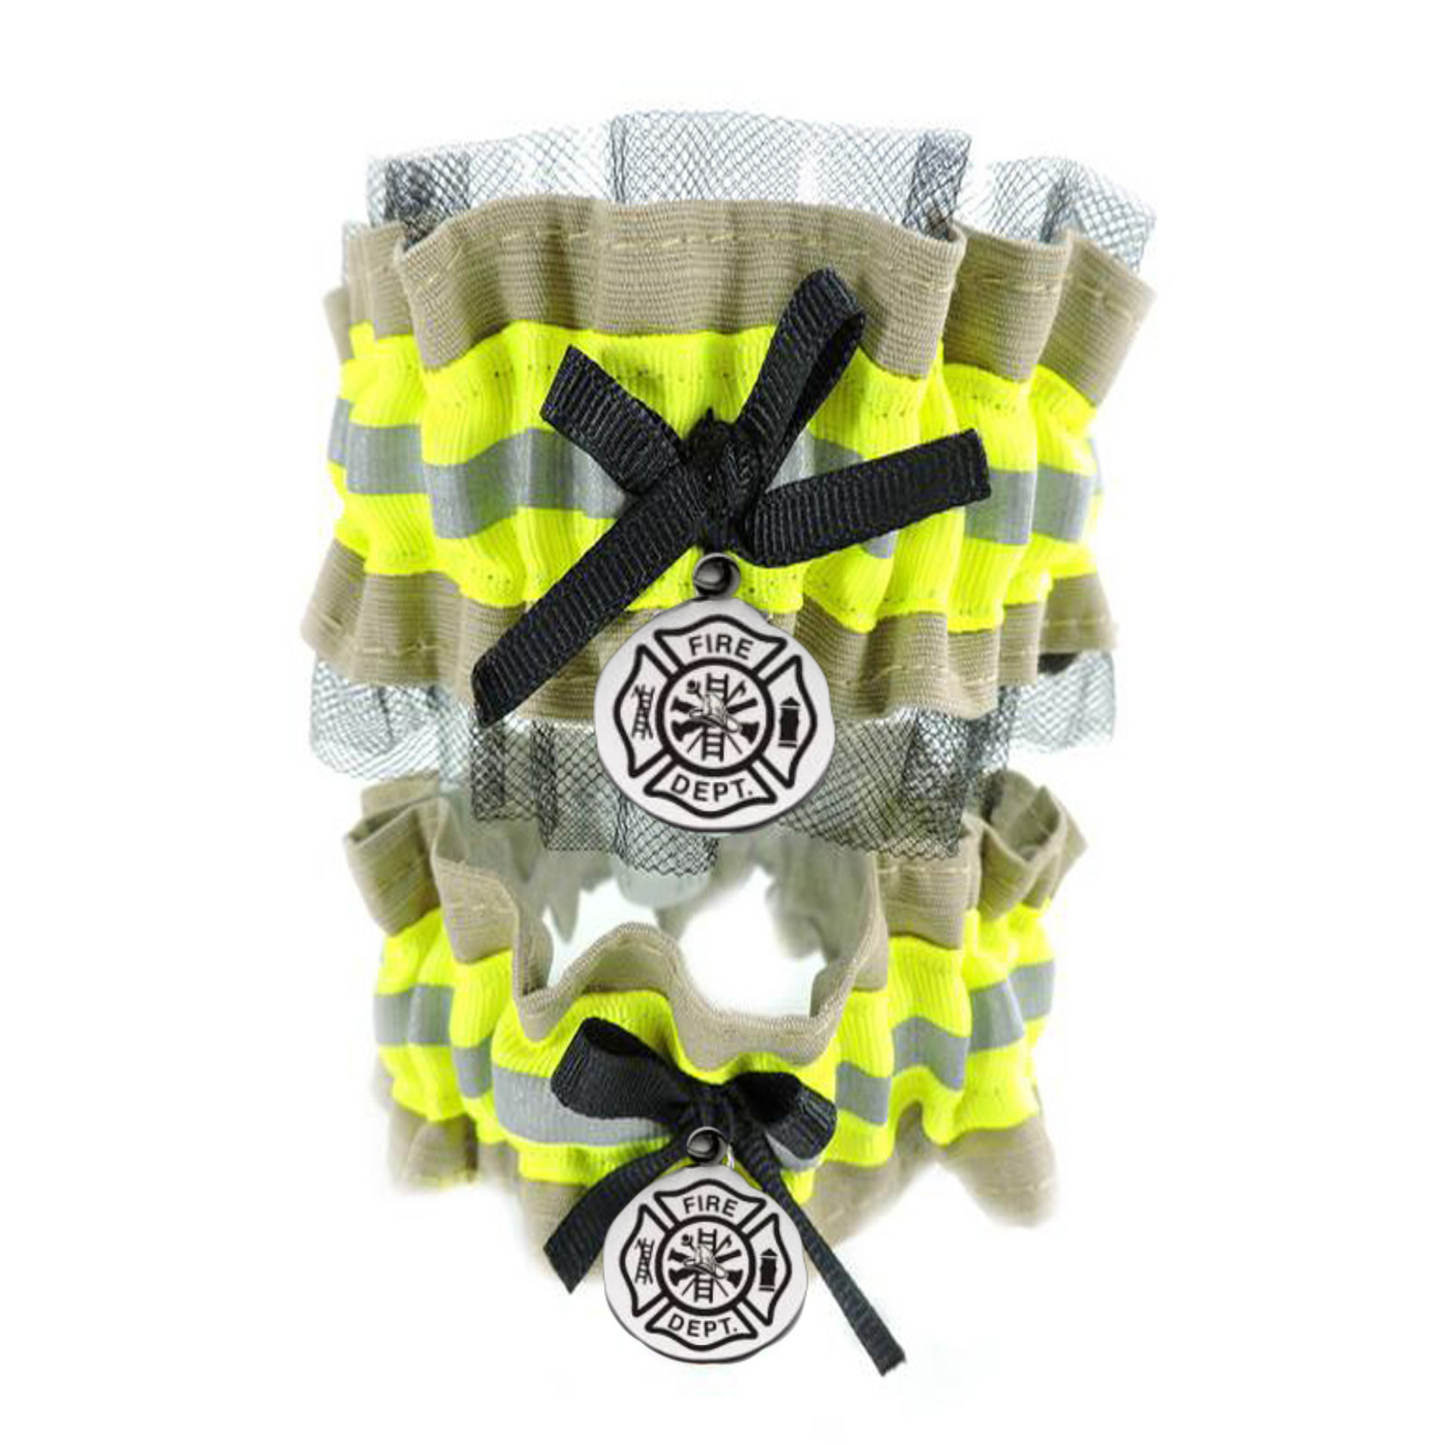 Firefighter wedding garter set, one with black tulle, toss garter without tulle tan fabric and neon yellow reflective tape